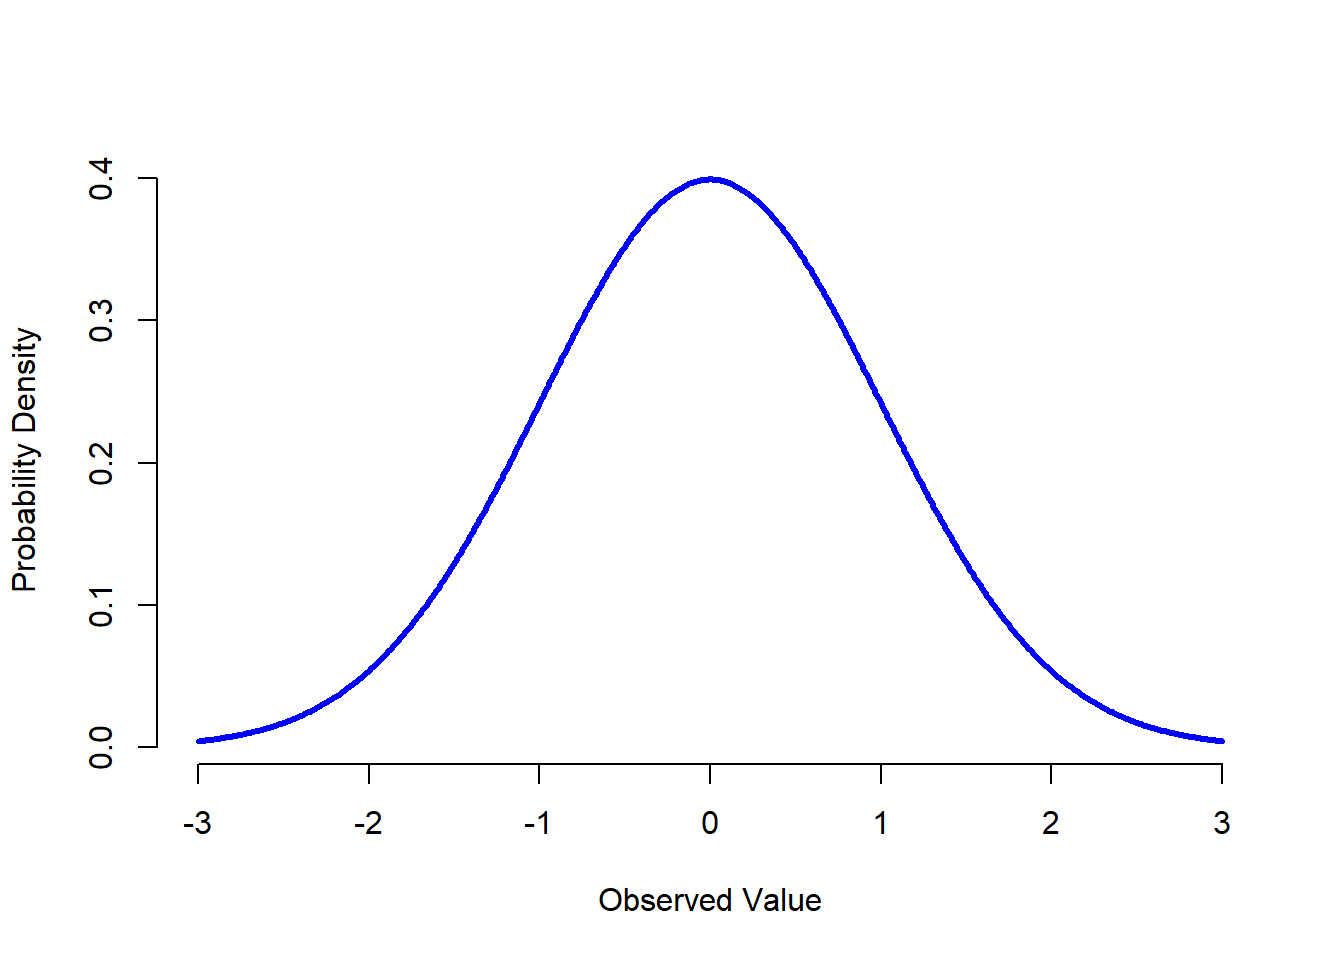 The normal distribution with mean $mu = 0$ and standard deviation $sigma = 1$. The $x$-axis corresponds to the value of some variable, and the $y$-axis tells us something about how likely we are to observe that value. However, notice that the $y$-axis is labelled "Probability Density" and not "Probability". There is a subtle and somewhat frustrating characteristic of continuous distributions that makes the $y$ axis behave a bit oddly: the height of the curve here isn't actually the probability of observing a particular $x$ value. On the other hand, it *is* true that the heights of the curve tells you which $x$ values are more likely (the higher ones!).